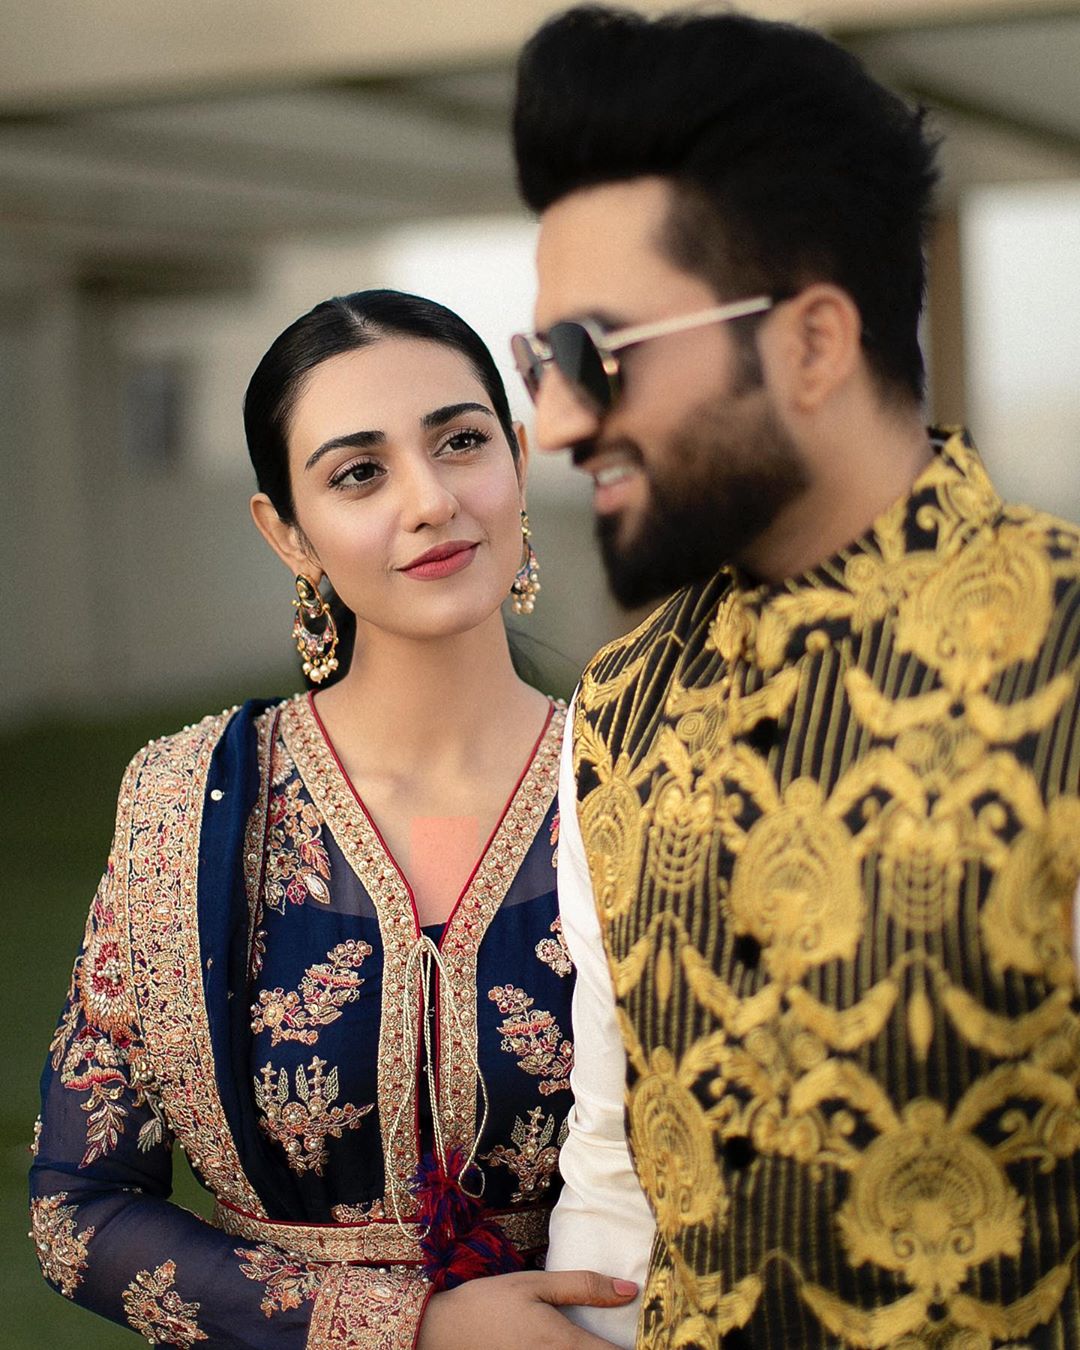 Newly Wed Couple Sarah Khan and Falak Shabbir Eid Pictures